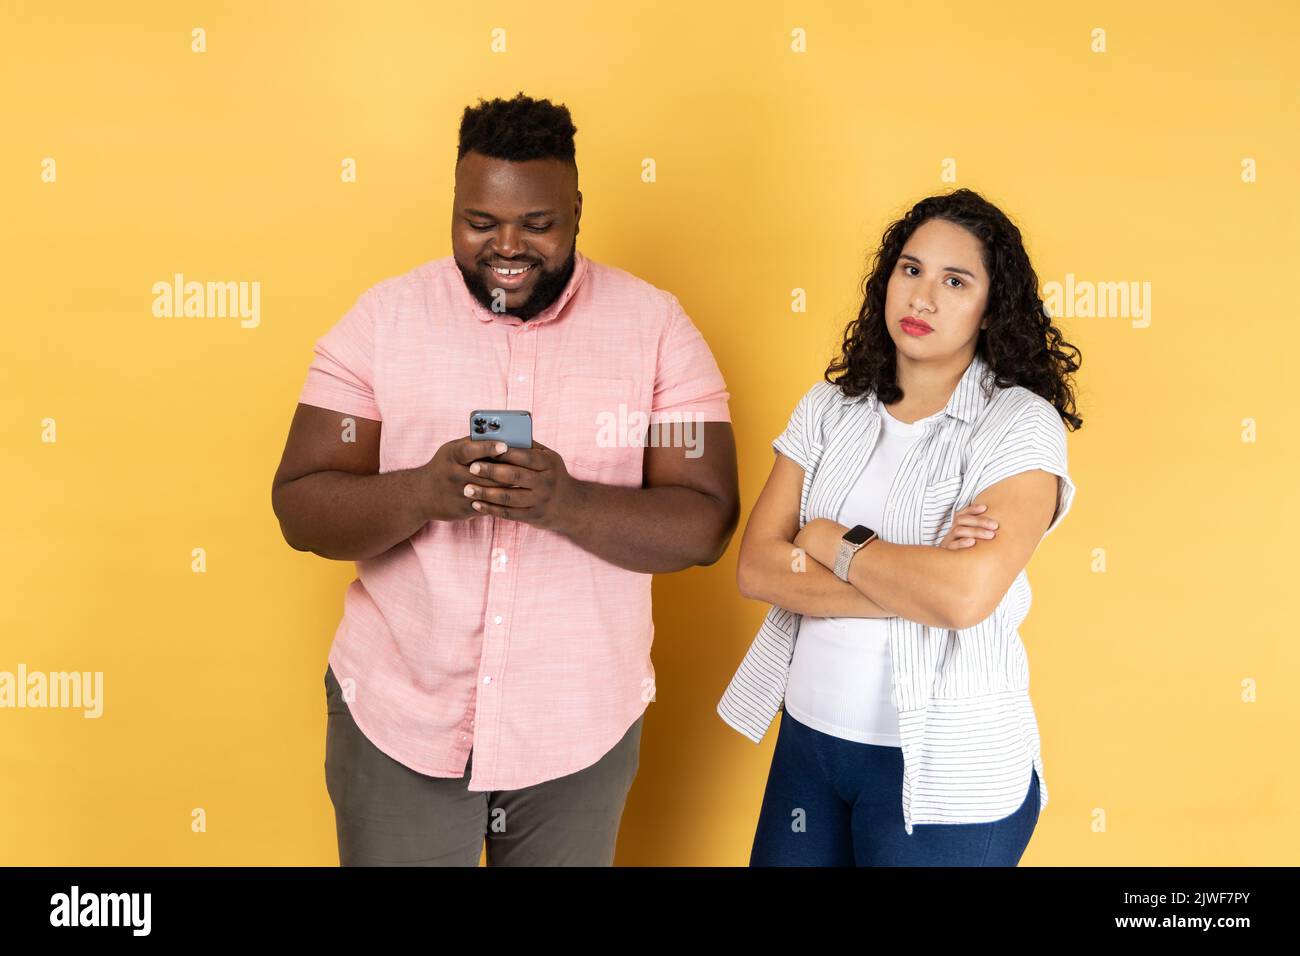 Satisfied young couple in casual clothing standing together, man using mobile phone and smiling, offended lonely woman standing with folded arms. Indoor studio shot isolated on yellow background. Stock Photo